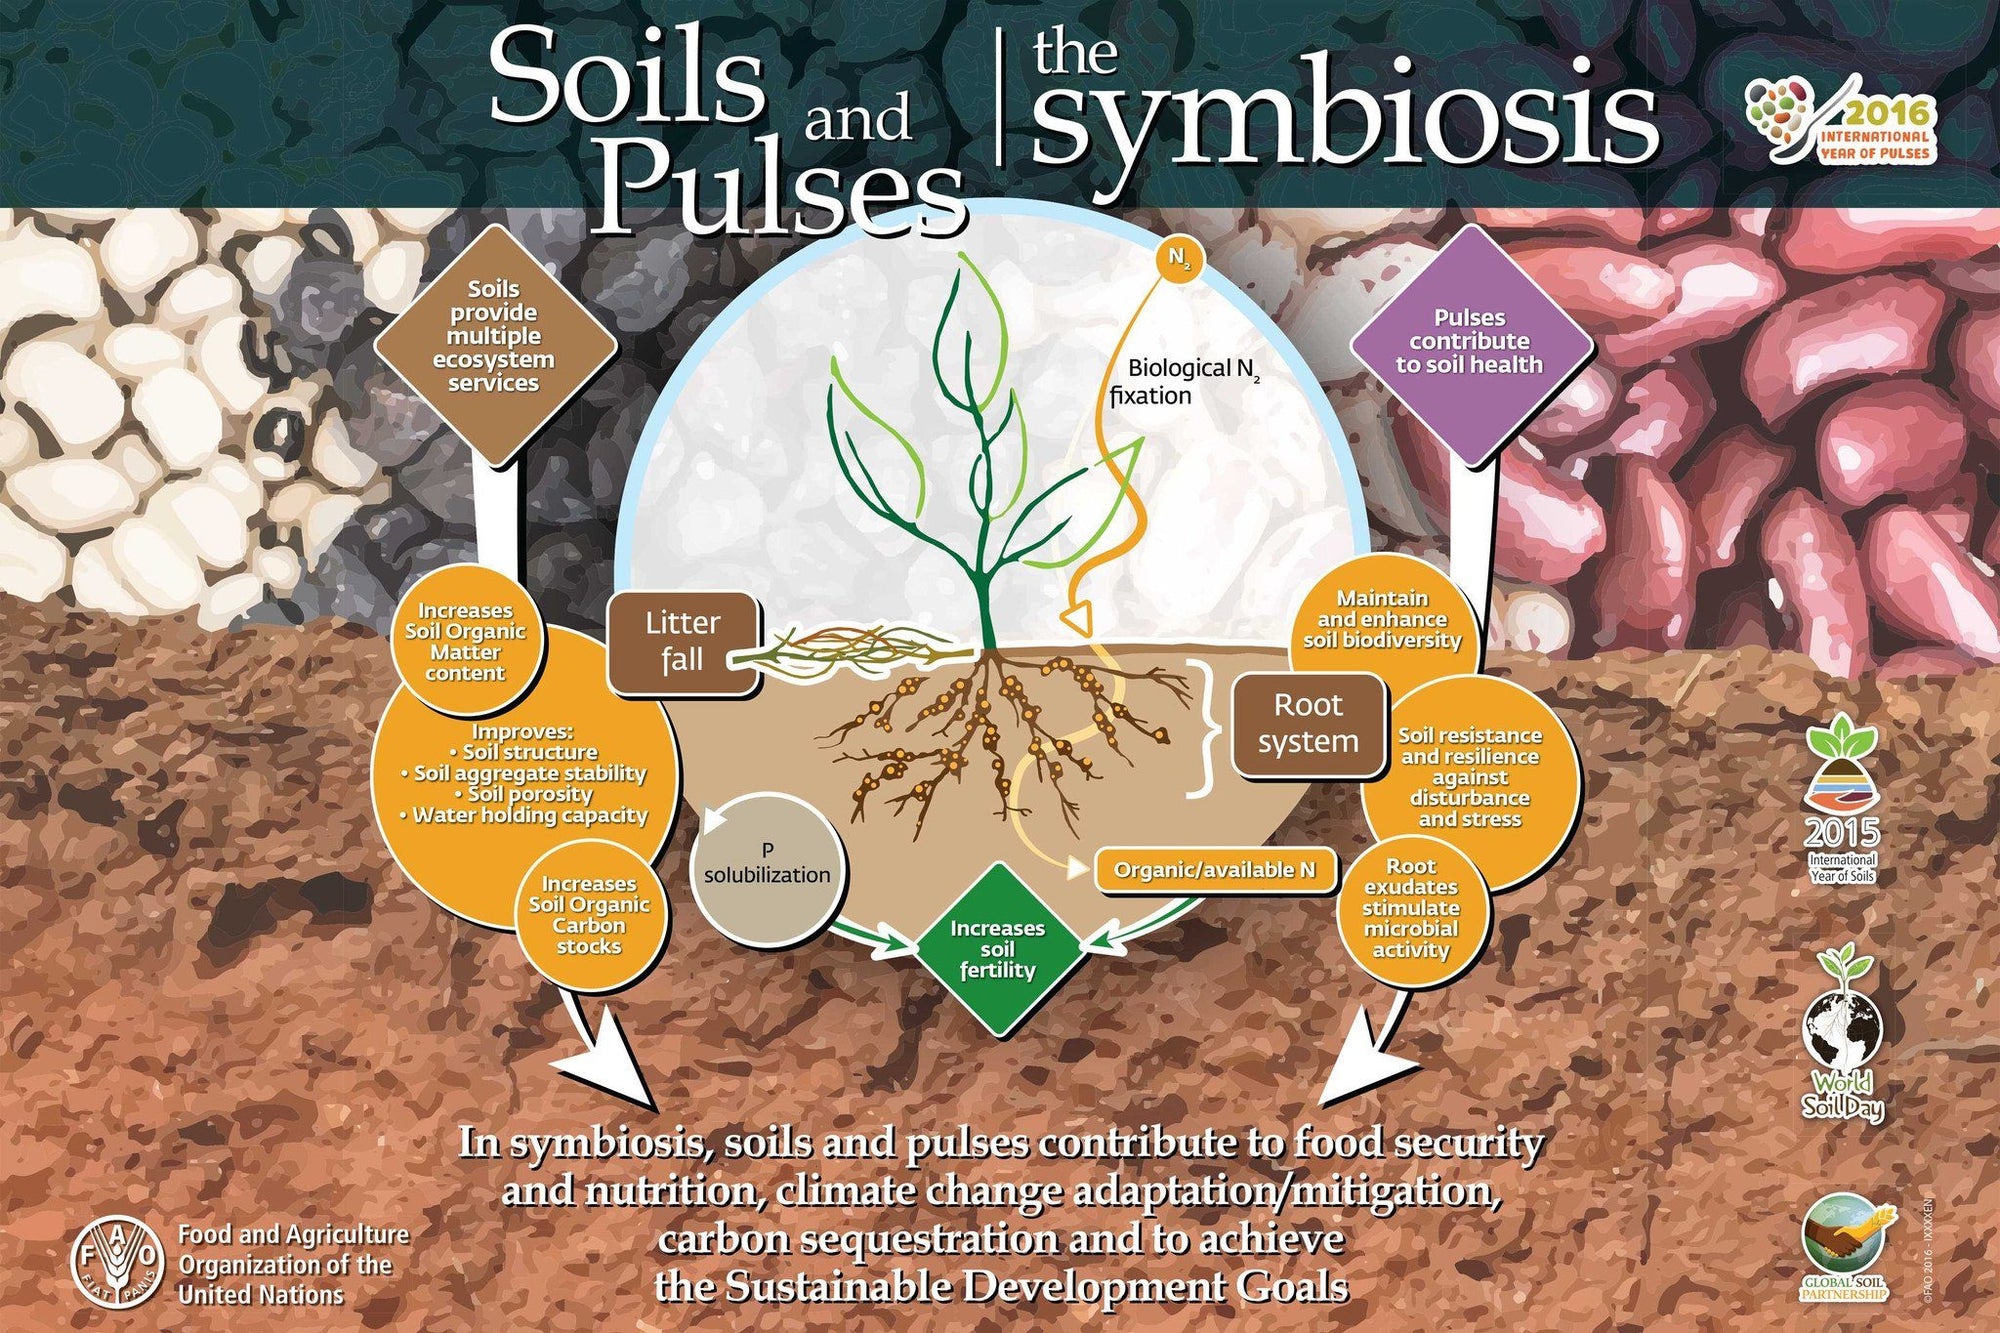 Soils and Pulses, a Symbiosis for Life